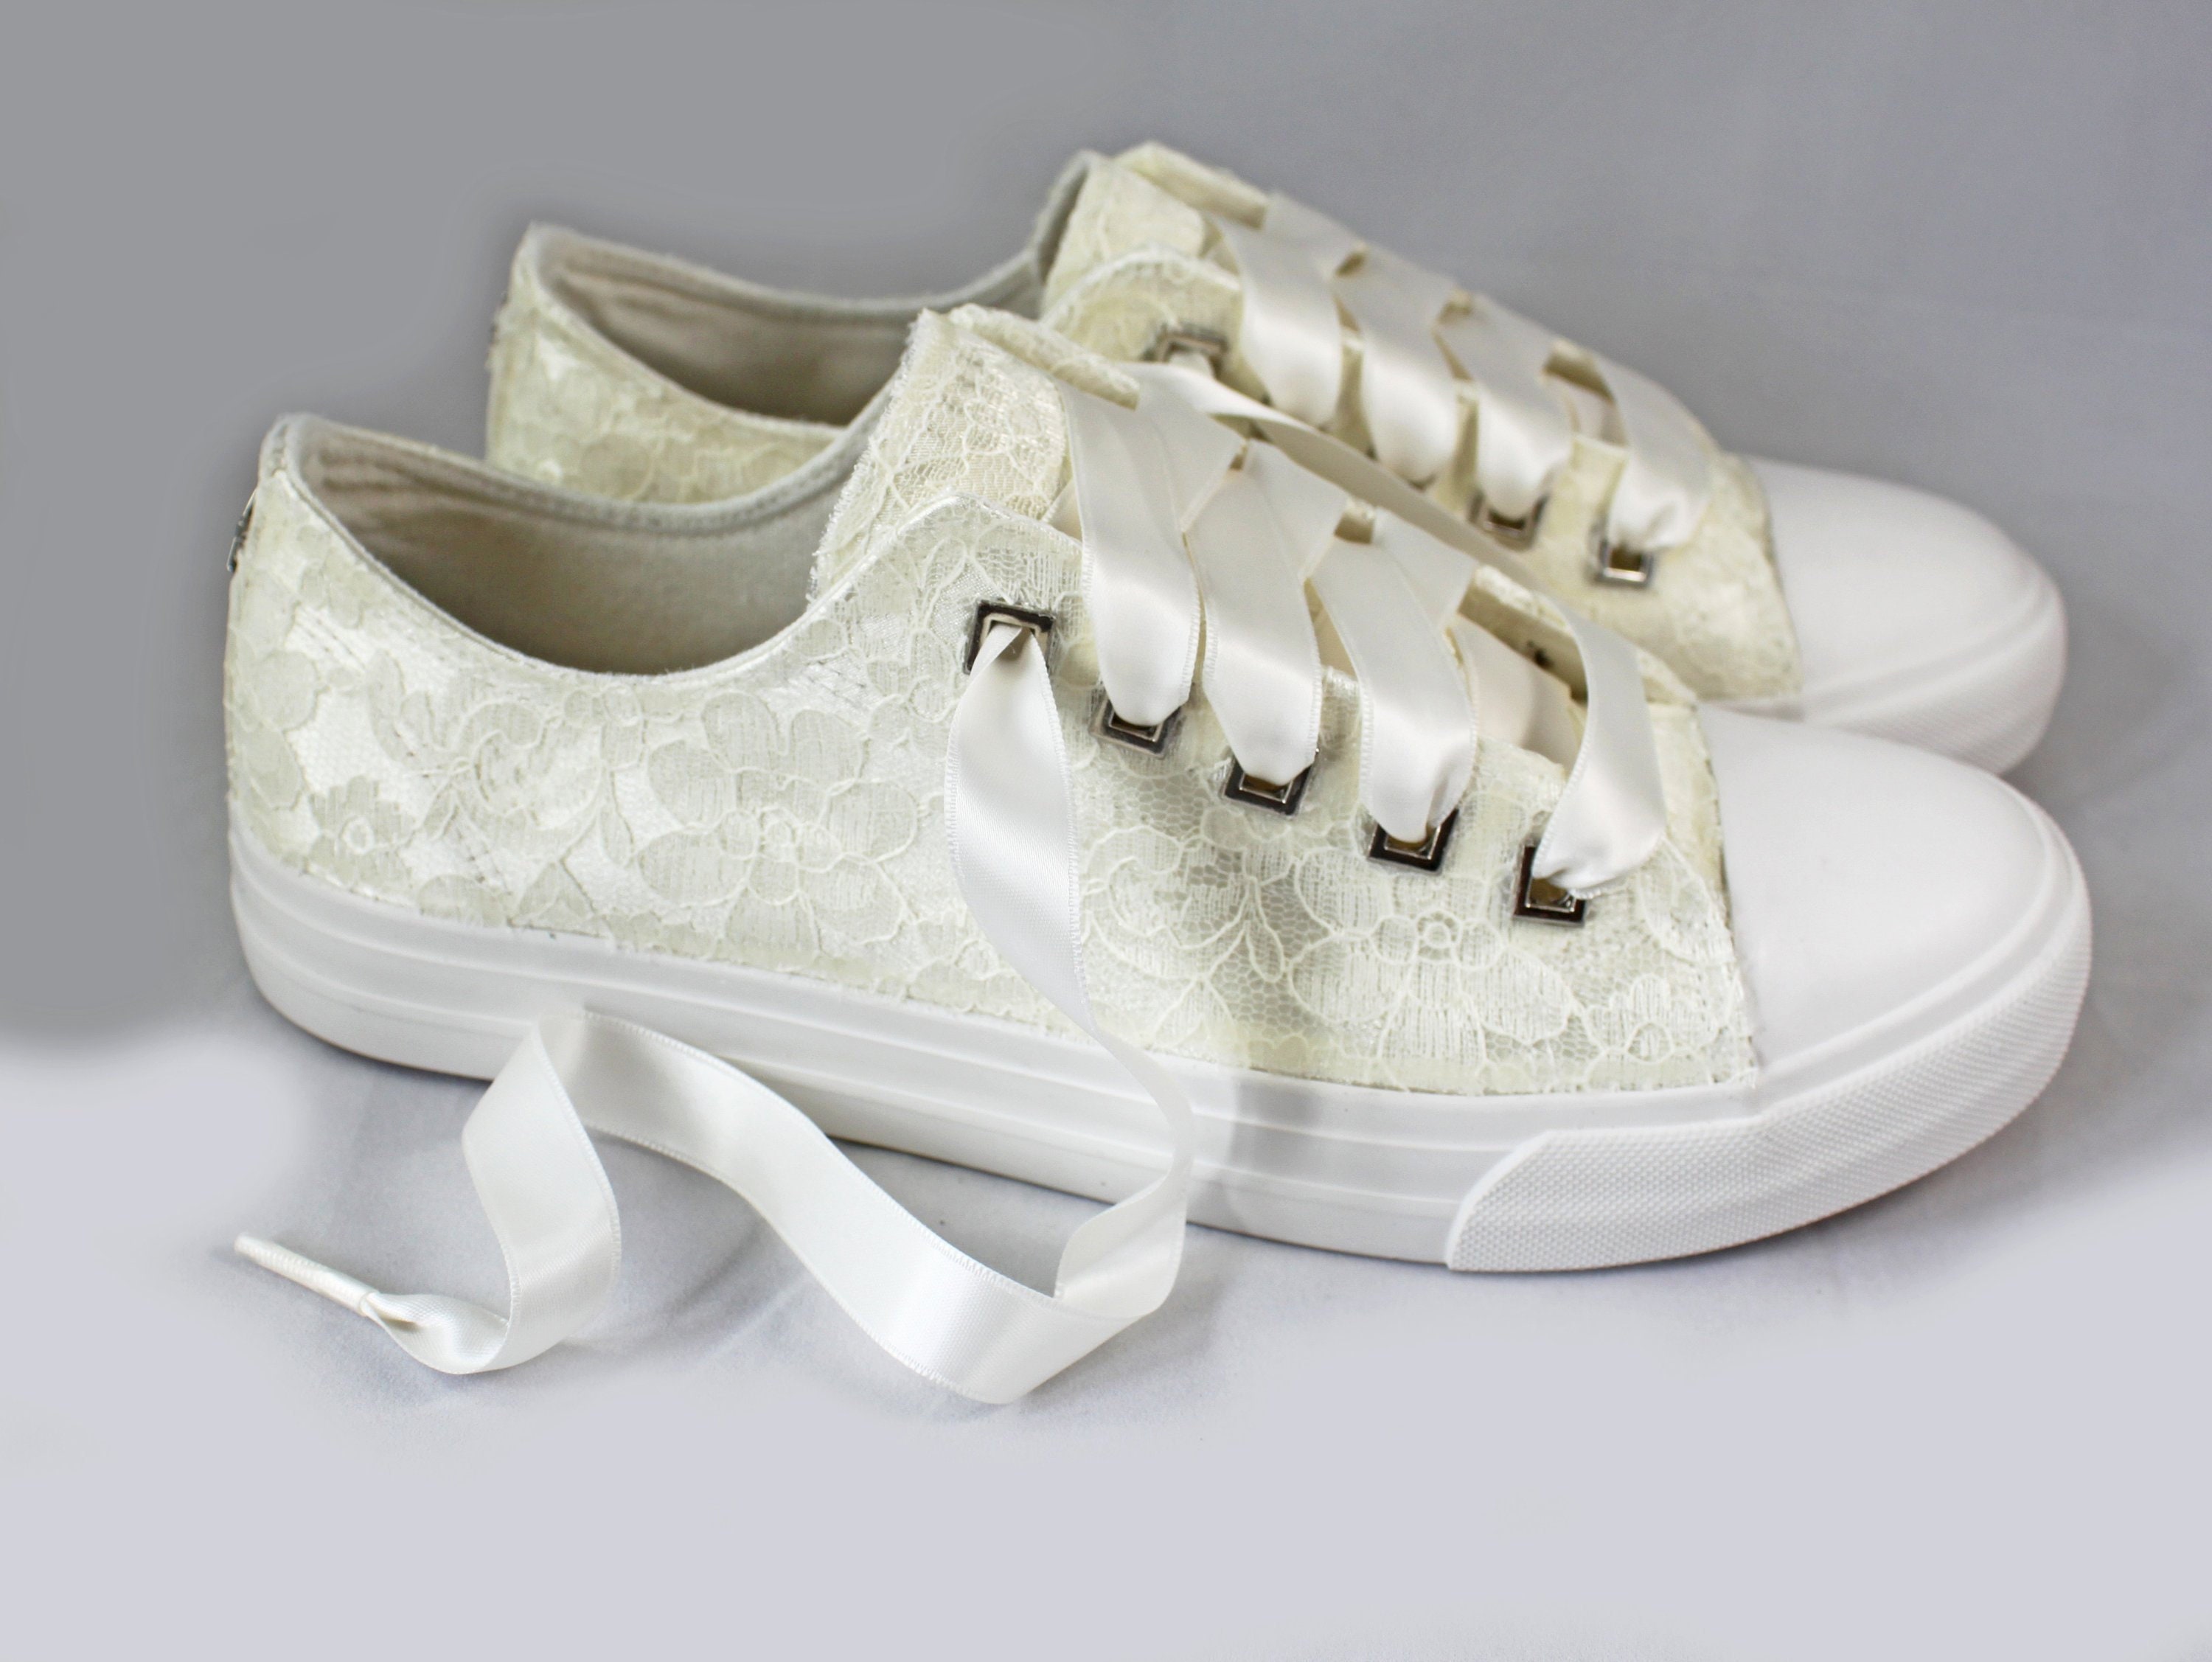 Wedding Sneakers Size 8 Ready to ship -Ivory Wedding -- Lace Customized